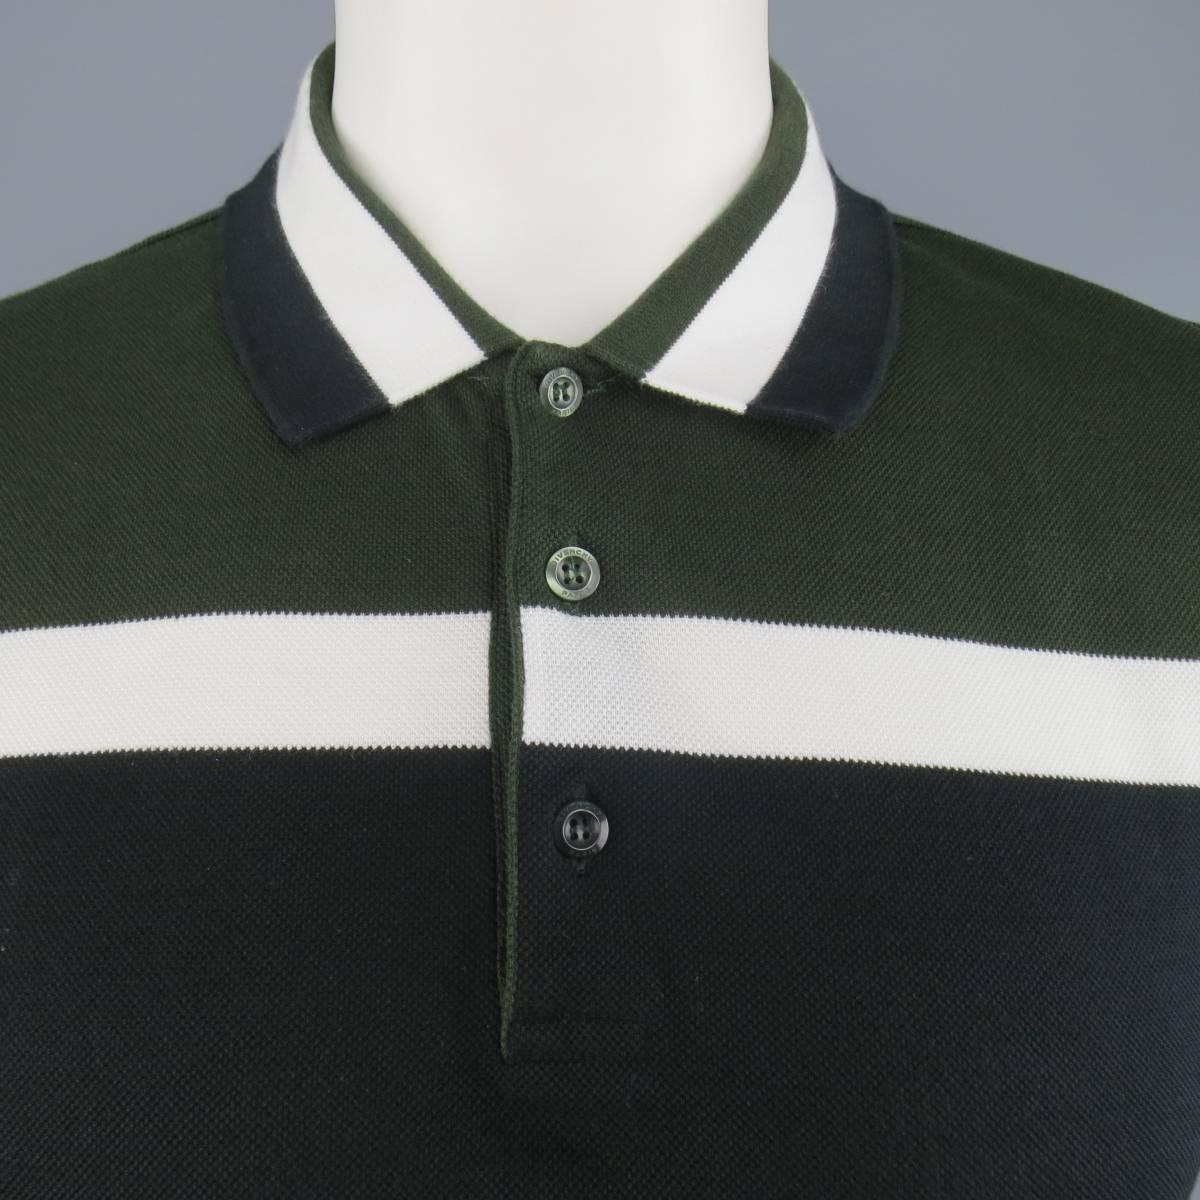 GIVENCHY by Riccardo Tisci polo comes in classic cotton pique with dark olive green, white and black stripe panel pattern and signature T cross stitch back. Made in Italy.
 
Excellent Pre-Owned Condition.
Marked: XL
Measurements:
 
Shoulder: 19